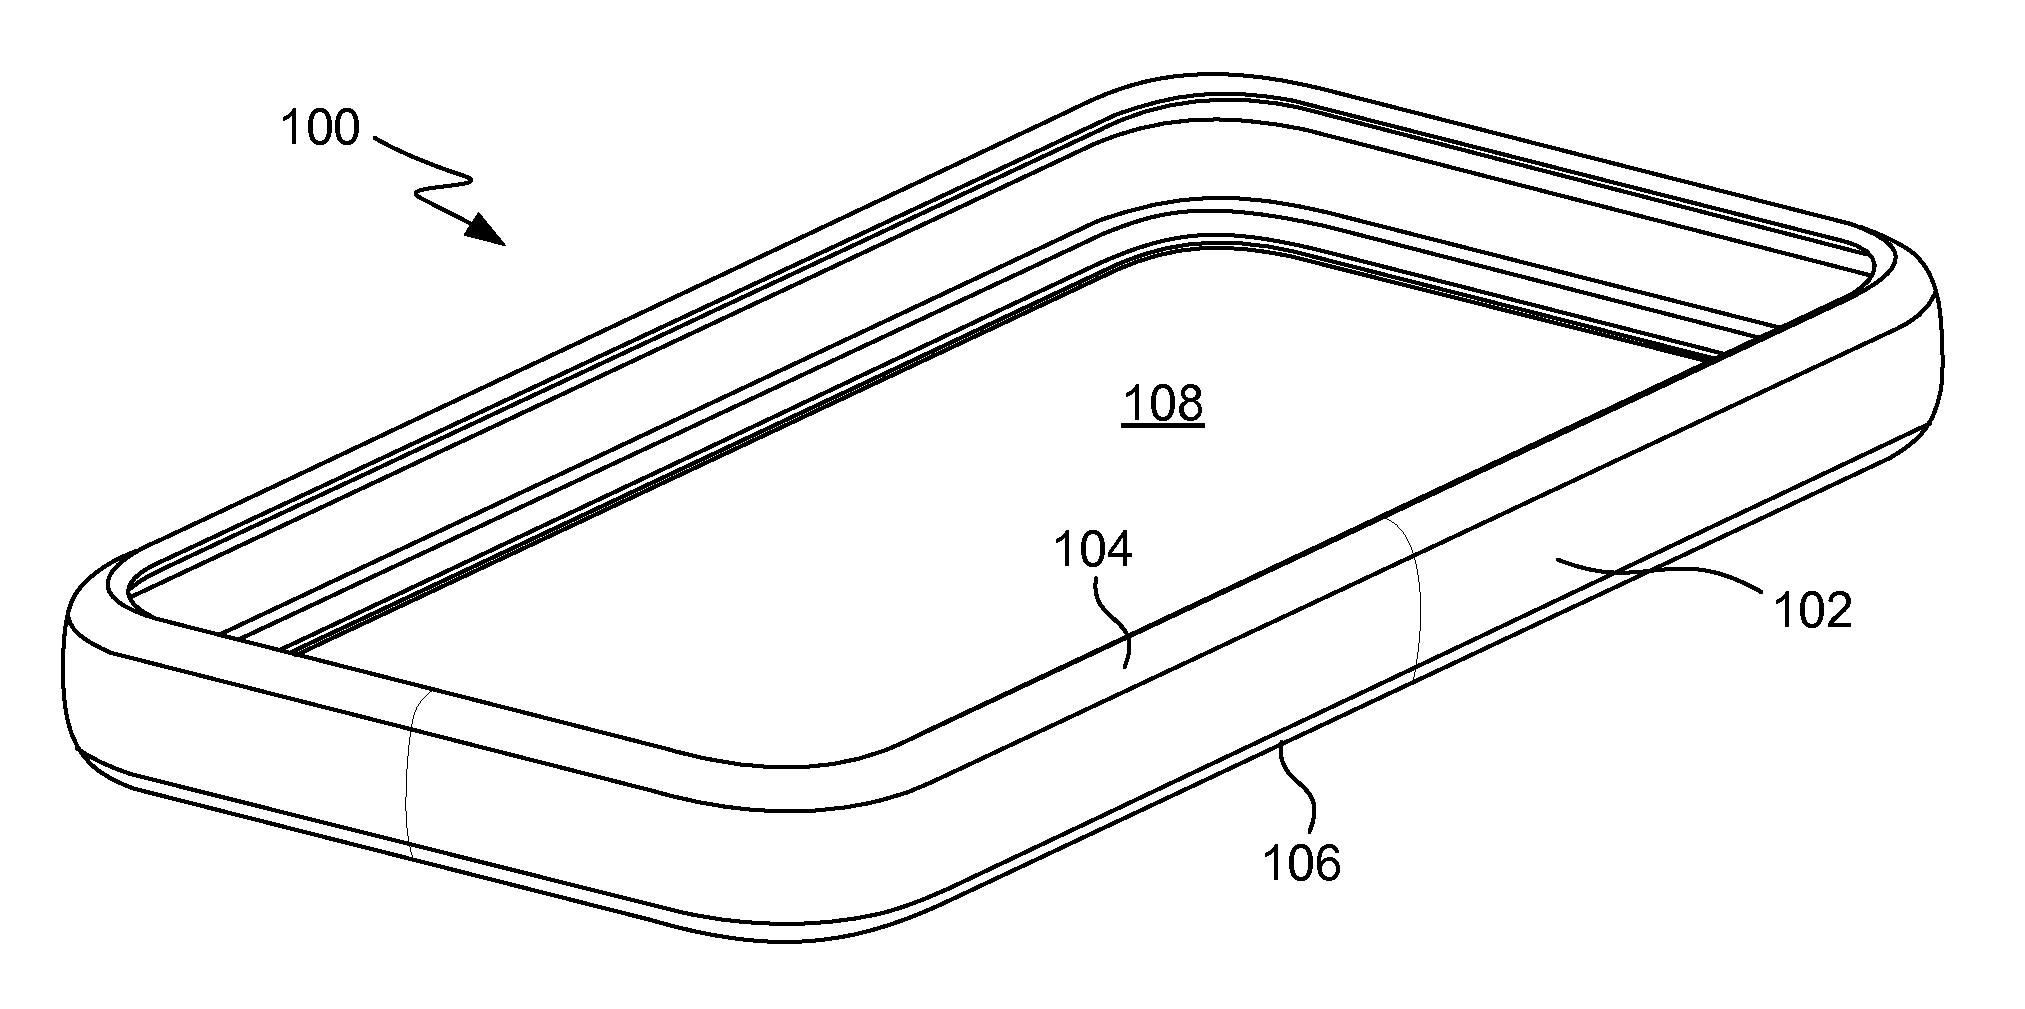 Ring-Shaped Cover for Portable Electronic Device